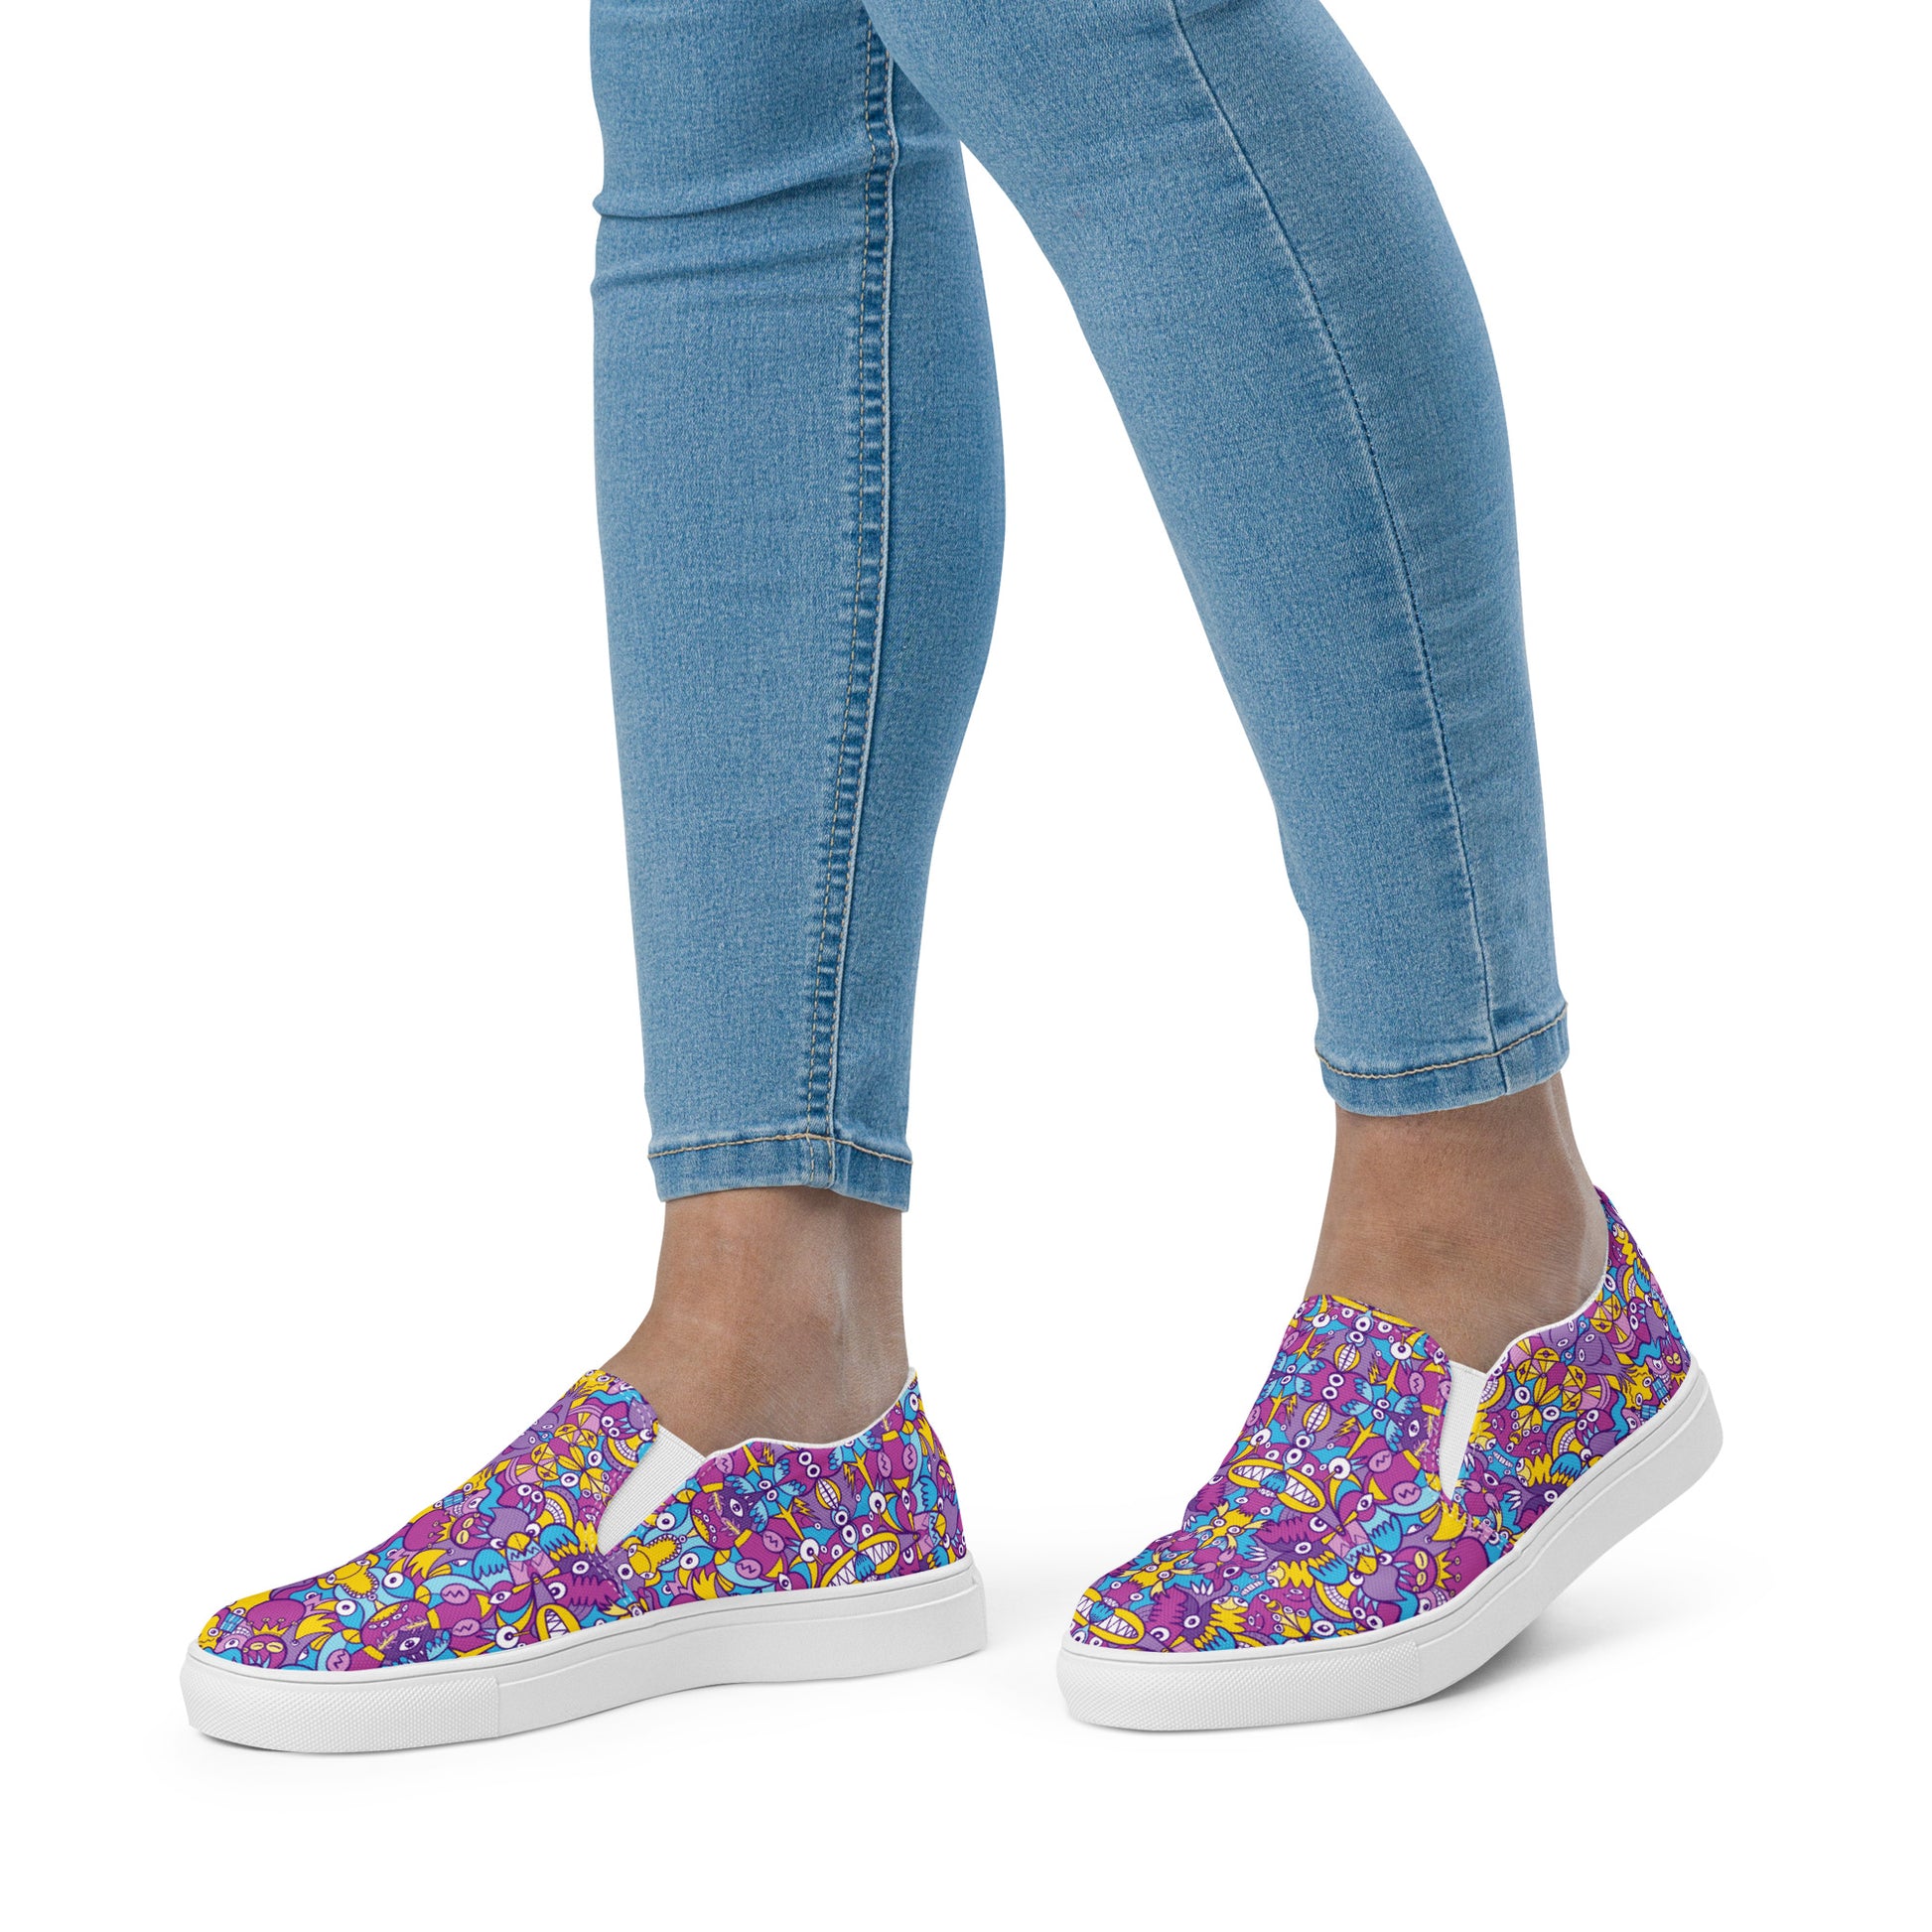 Doodle art compulsion is out of control Women’s slip-on canvas shoes. Lifestyle